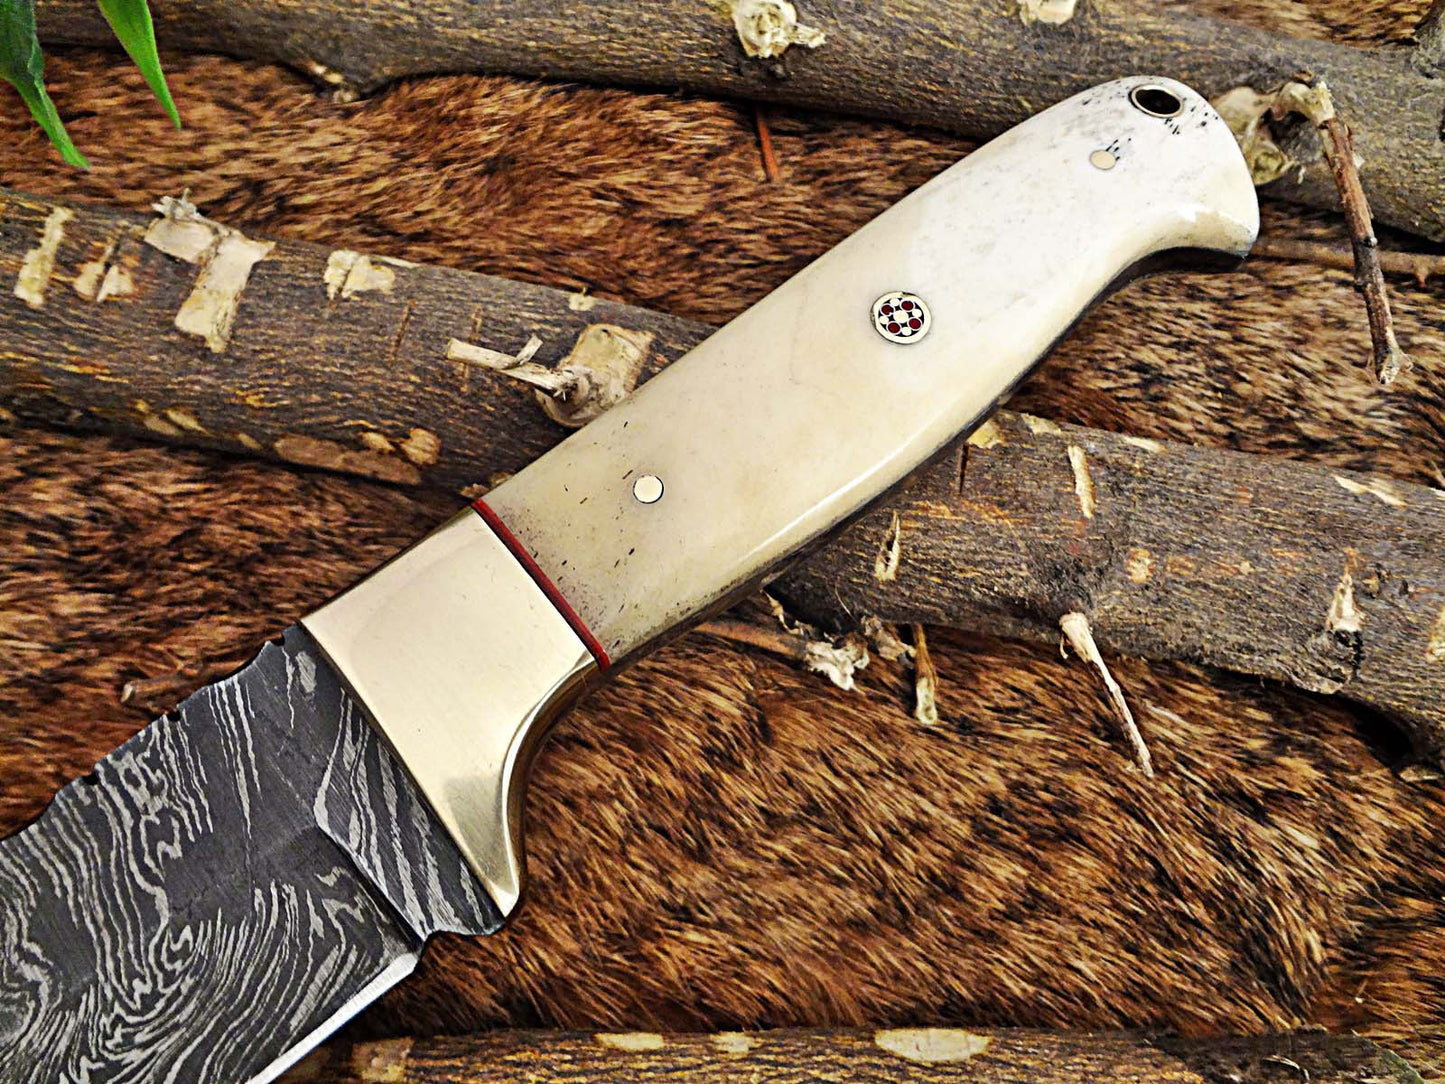 9" Damascus steel skinning knife, 4.5" full tang blade, Available in White and Red colors,  includes Cow hide Leather sheath